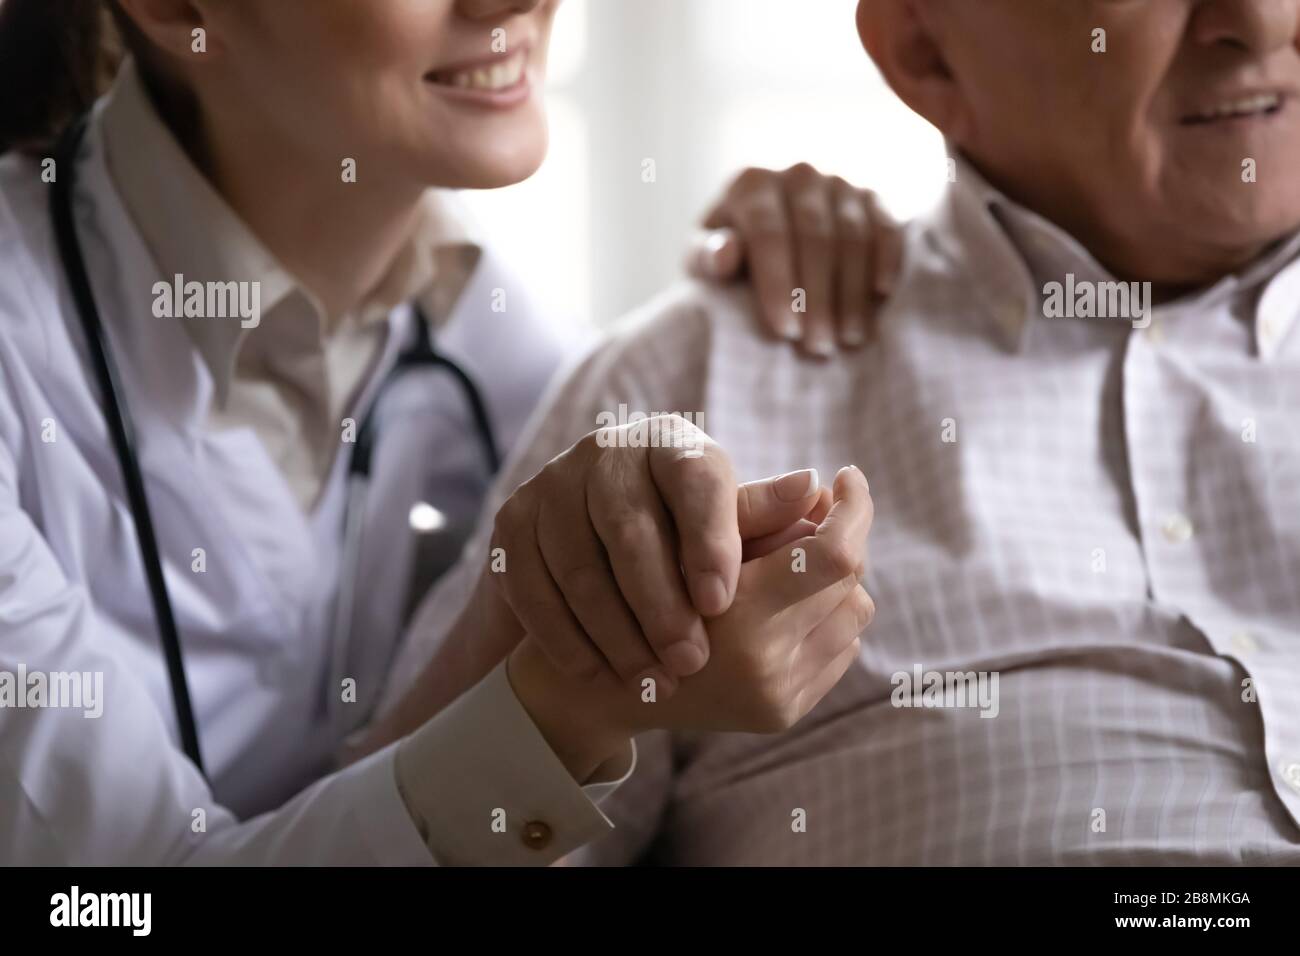 Closeup cropped image nurse holding hand of old man patient Stock Photo